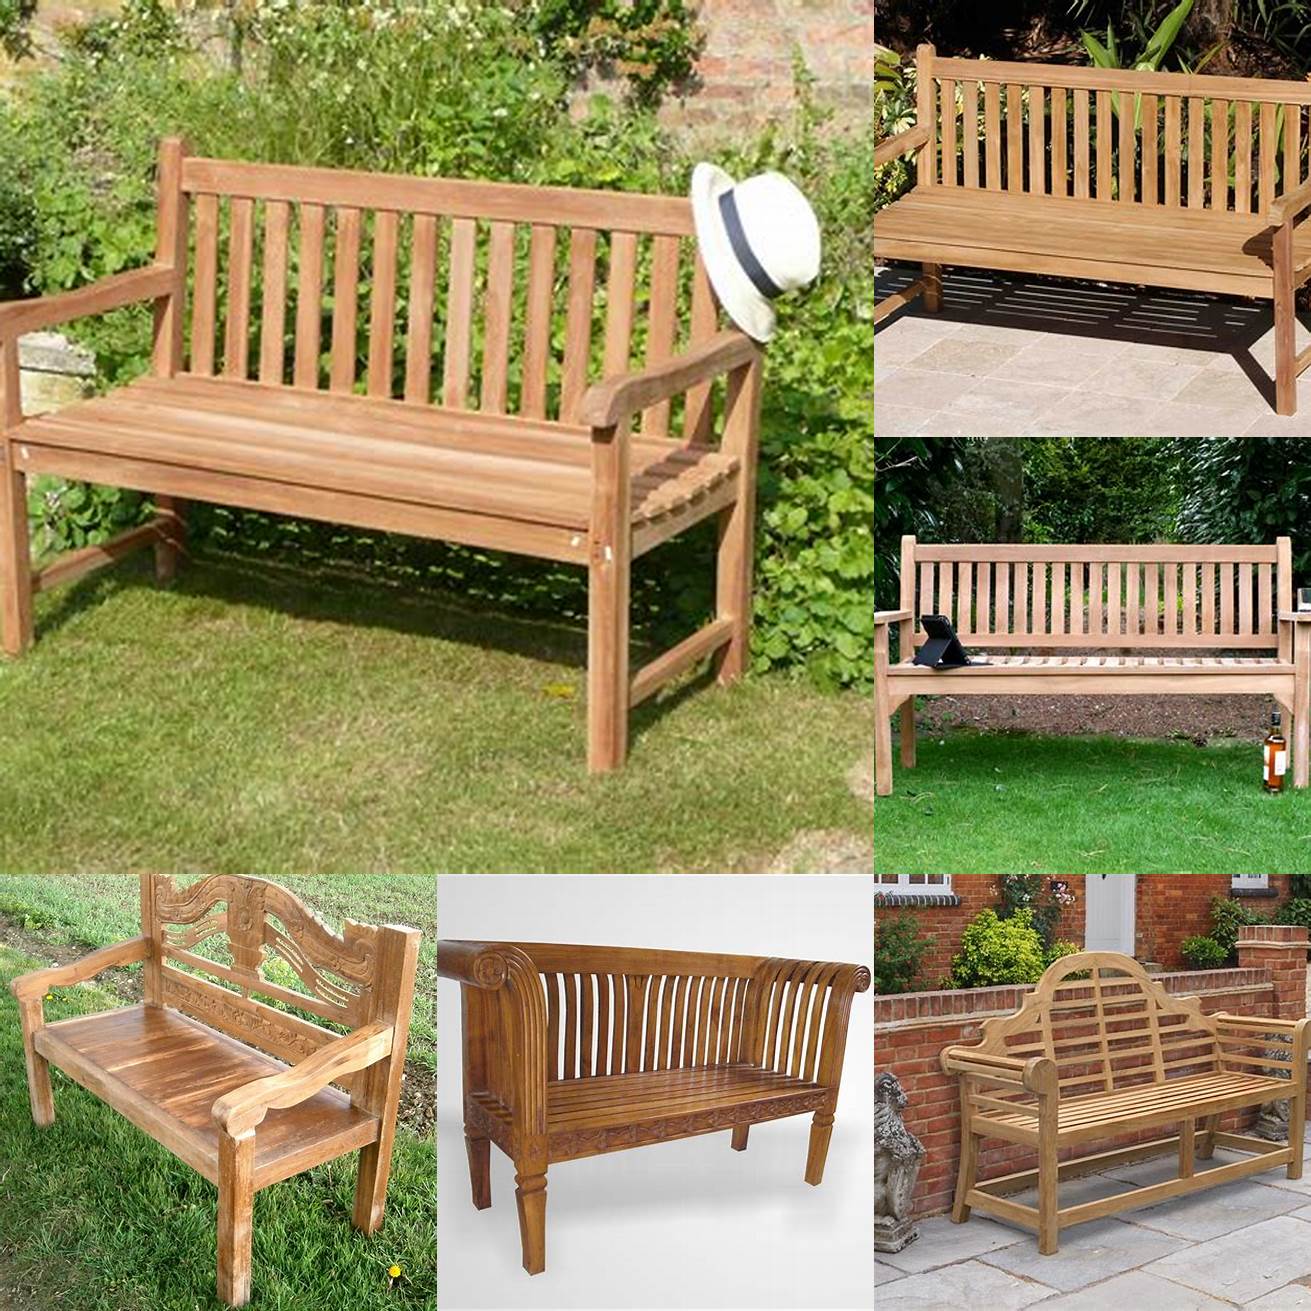 Teak Benches for Seating